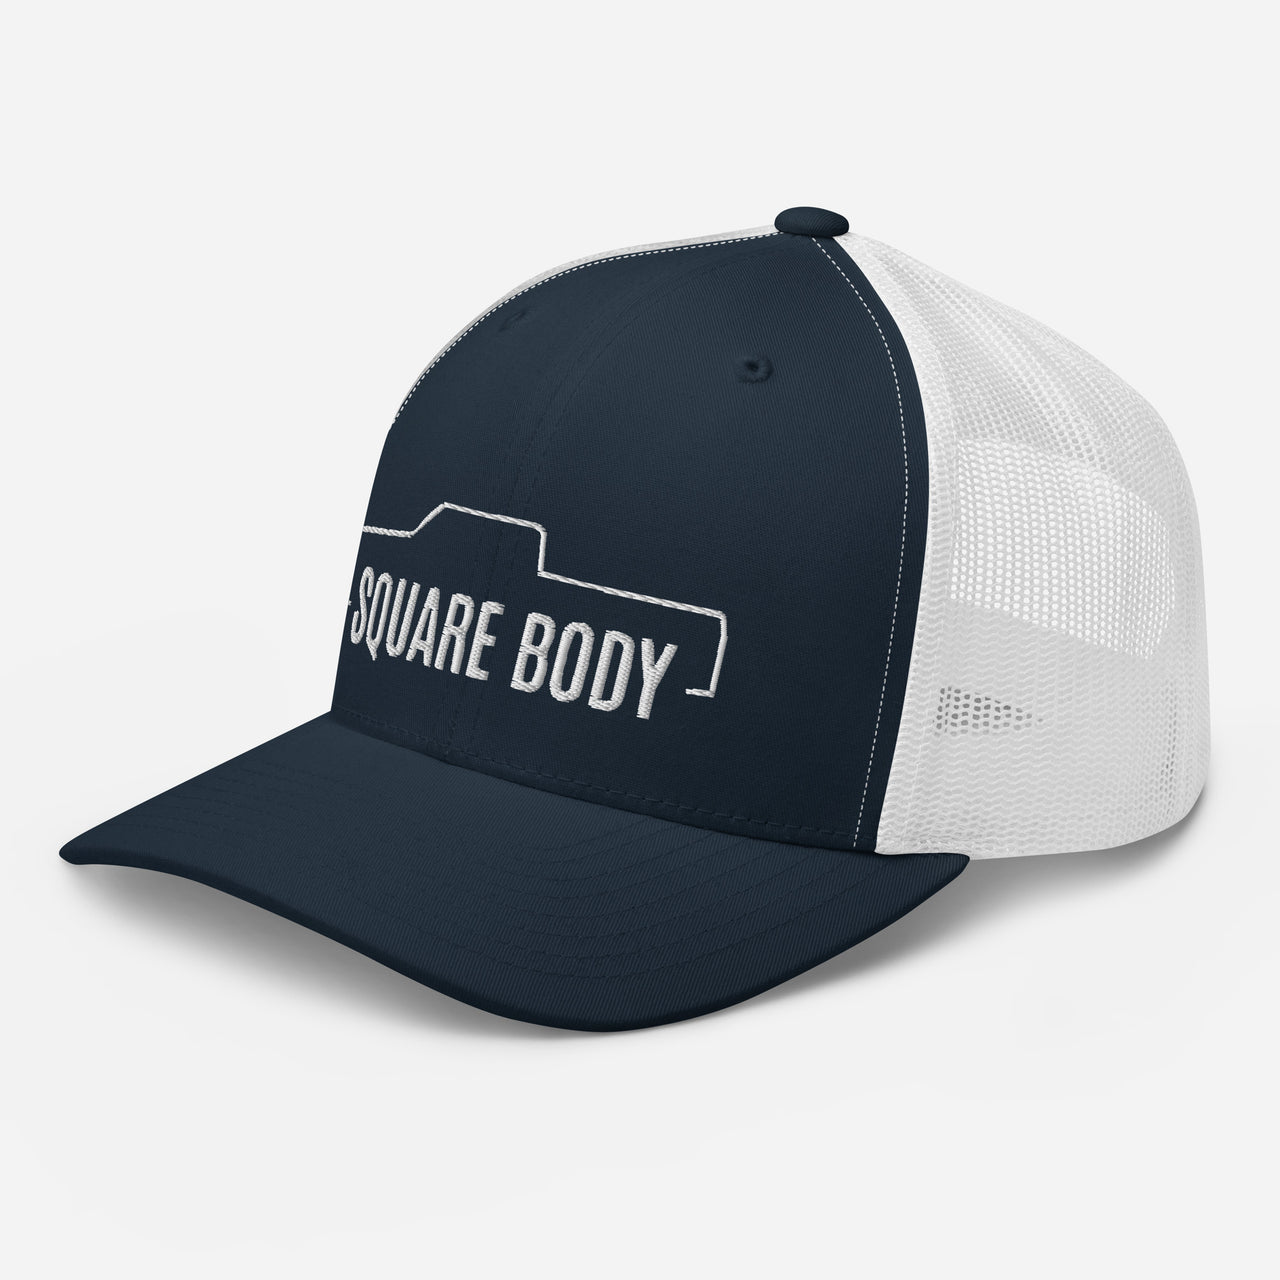 3/4 view of Crew Cab Square Body Trucker Hat From Aggressive Thread in Navy and White